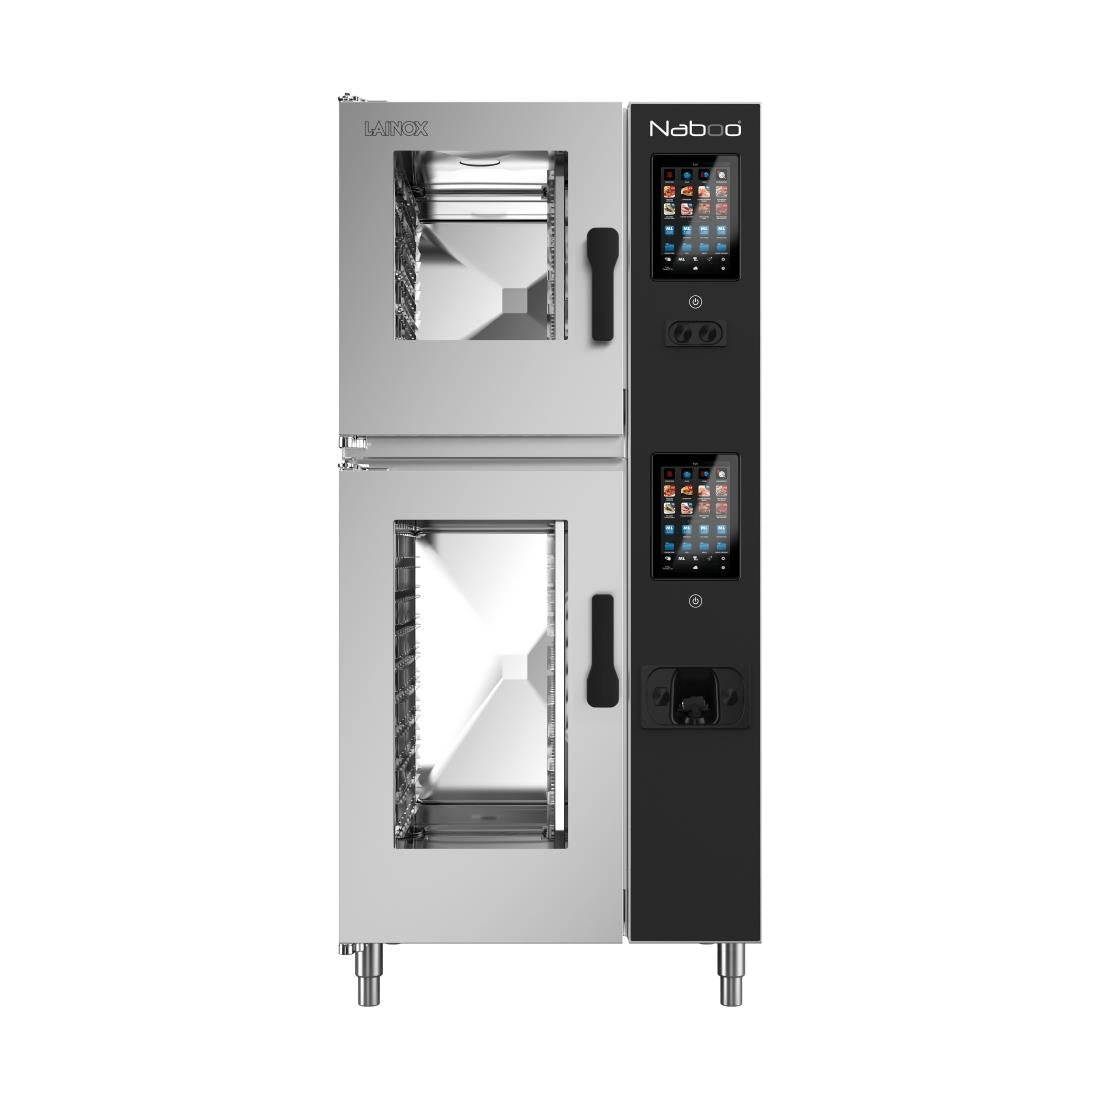 HP556 Lainox Naboo Boosted Electric Touch Screen Combi Oven NAE161BV 16X1/1GN JD Catering Equipment Solutions Ltd